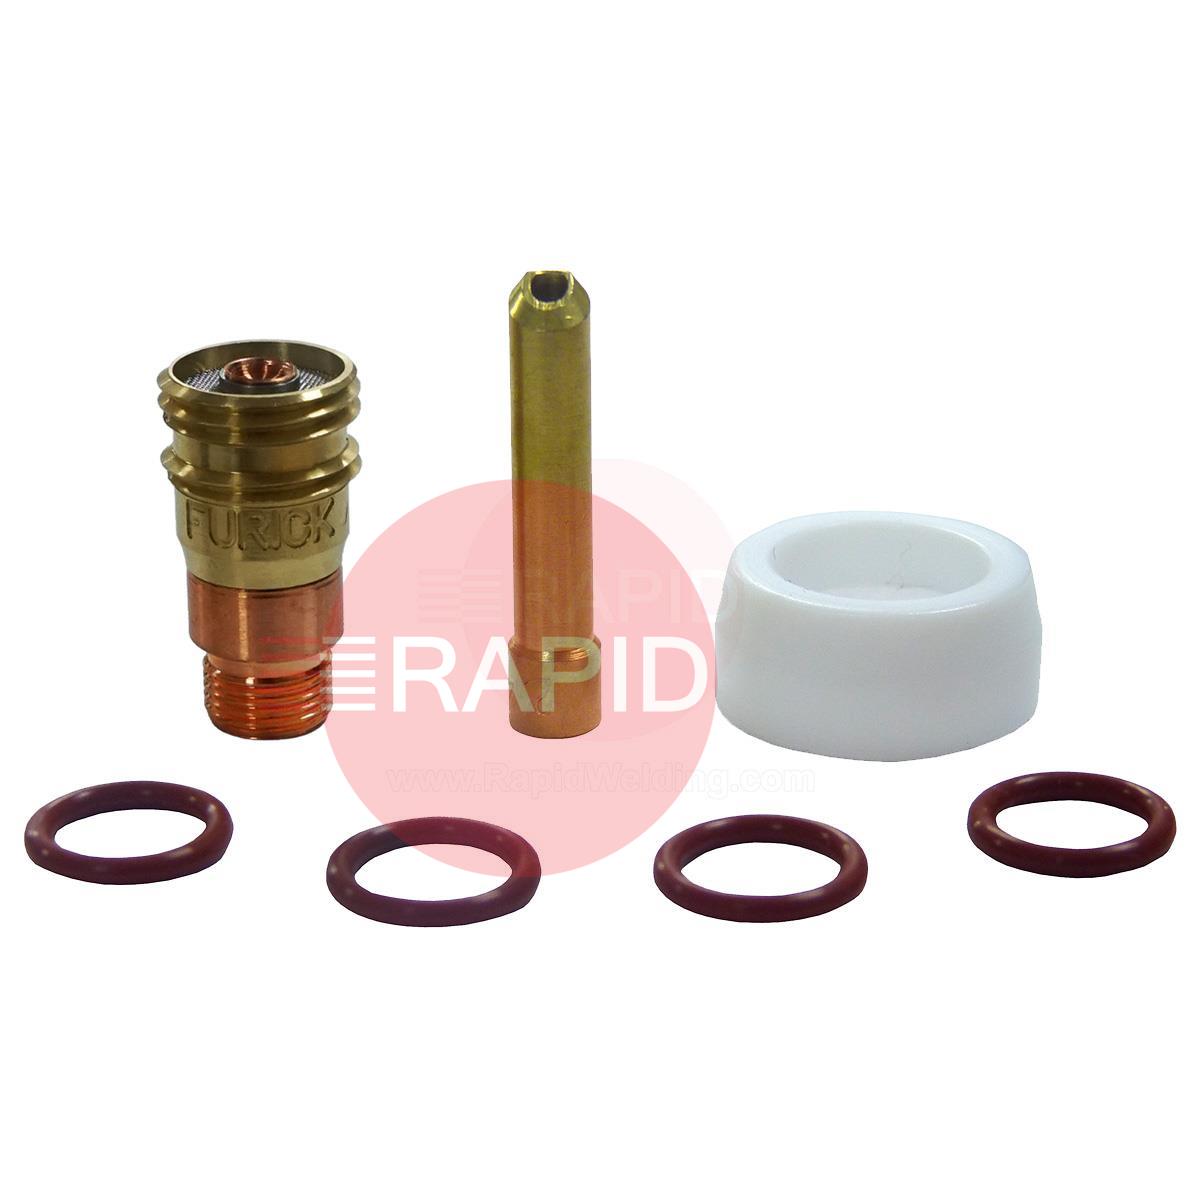 17KIT  Furick No.17 TIG Torch Adaptor Kit for 2.4mm (1x collet body, 1x wedge collet, 1x heatshield & 4 O-rings)